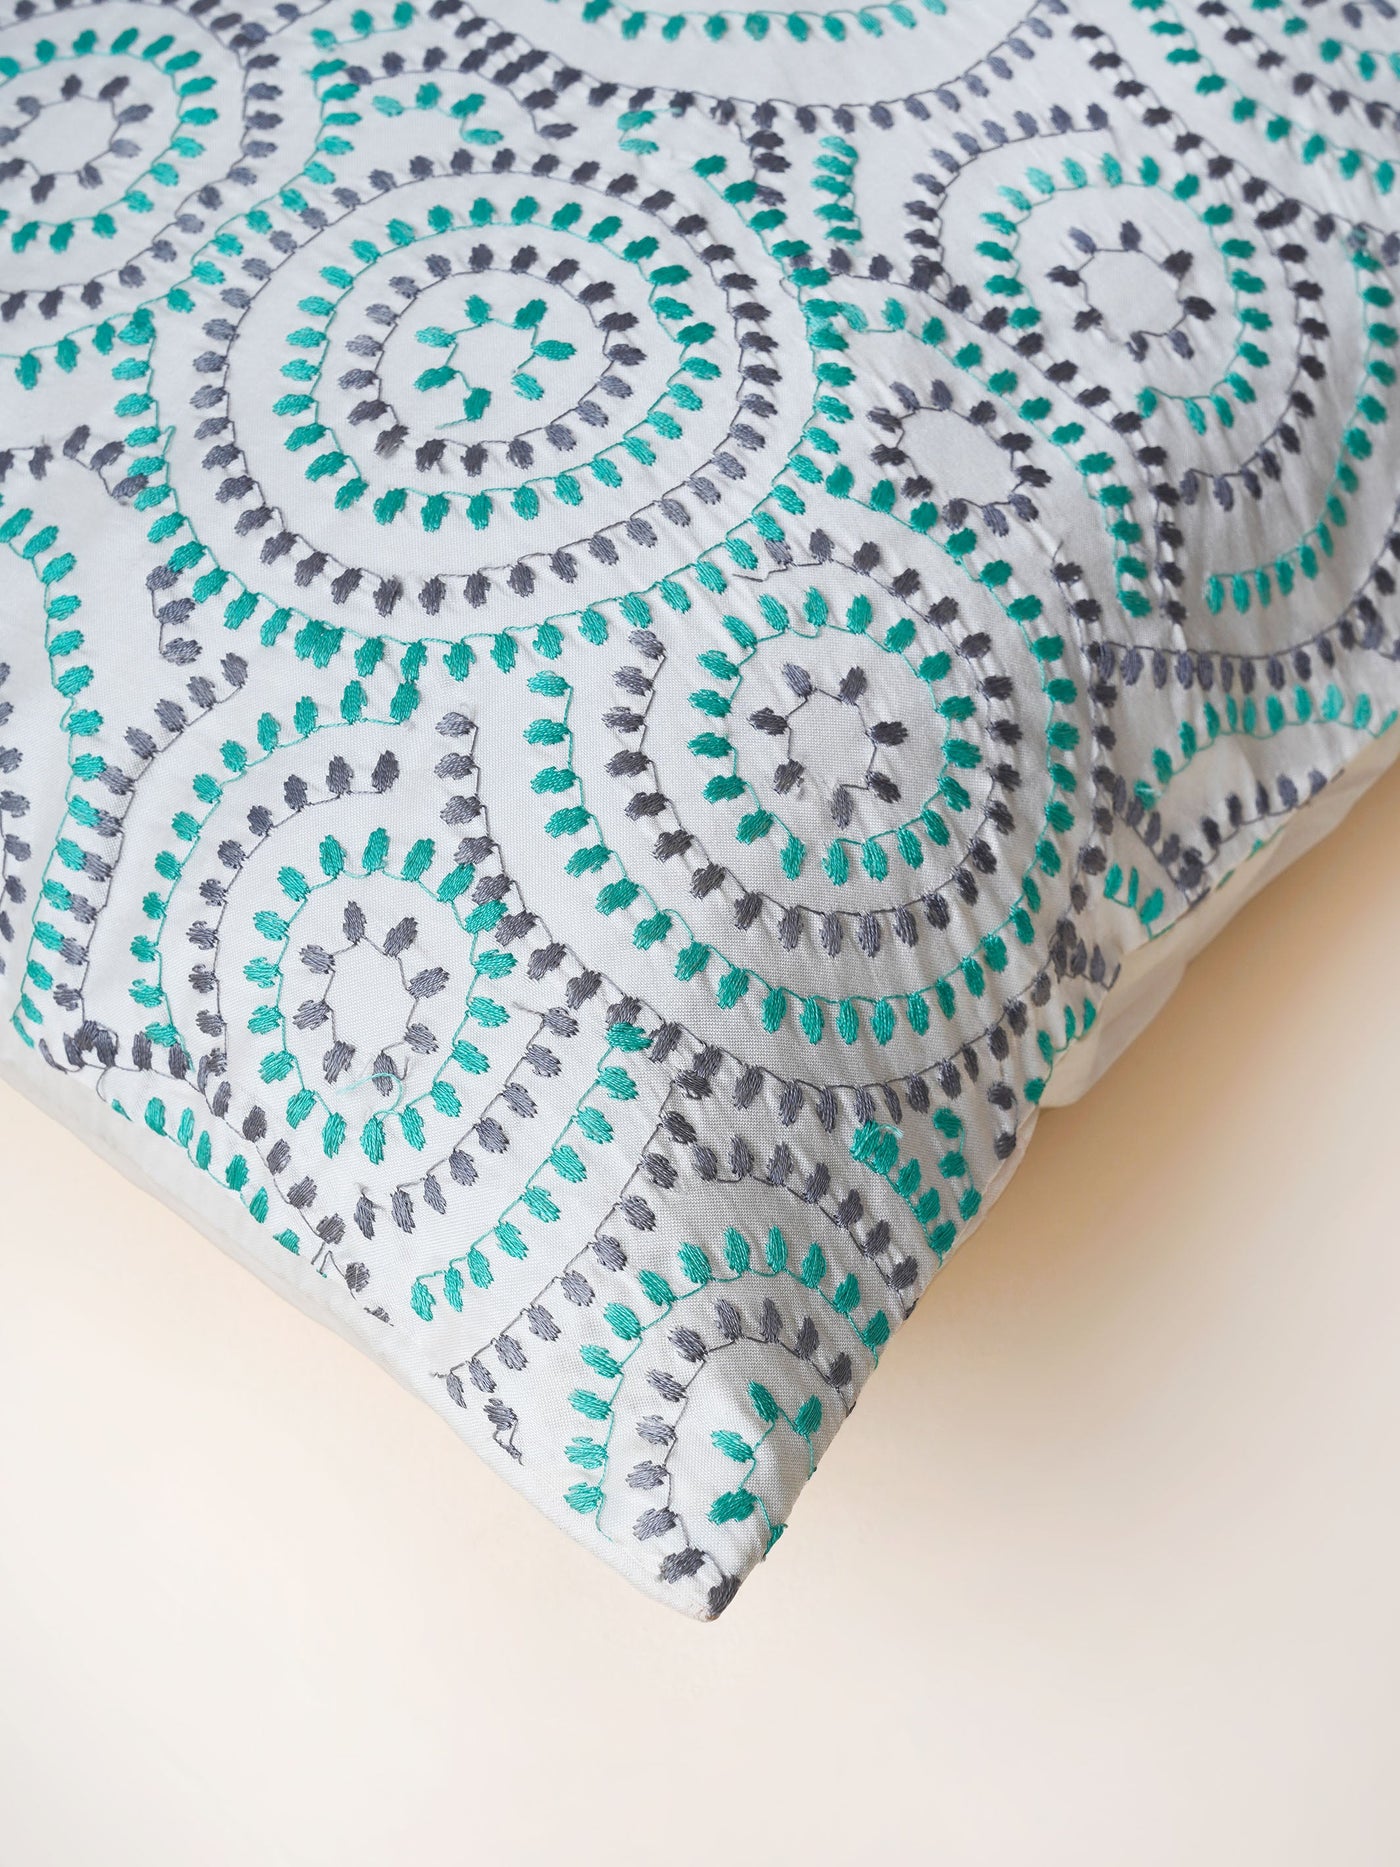 Whirl Wind Embrioded Cushion